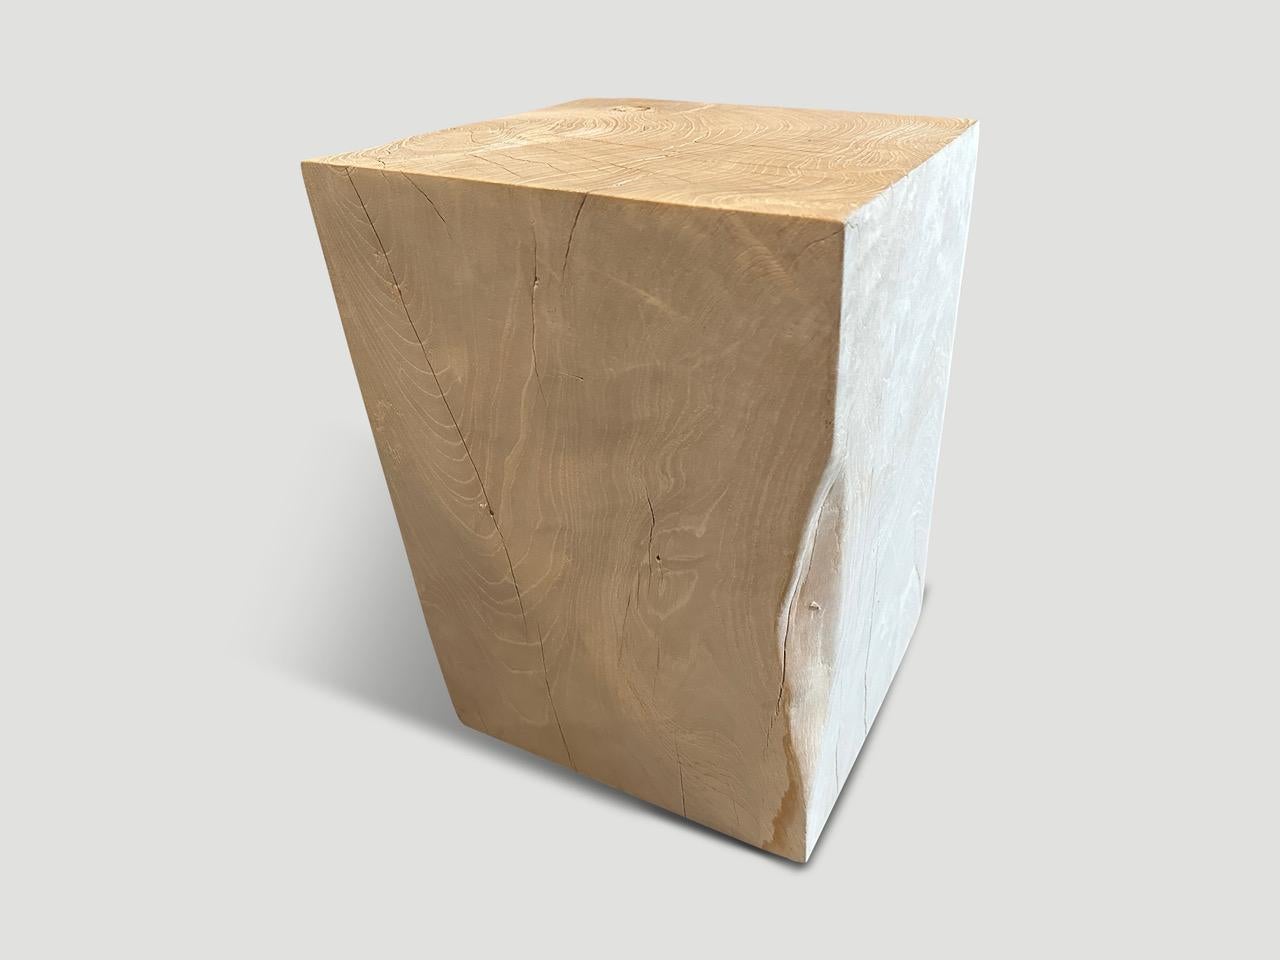 Reclaimed teak wood side table, hand carved whilst respecting the natural organic wood. Bleached to a bone finish. We have a collection. The images reflect the one shown. Also available charred.

The St. Barts Collection features an exciting line